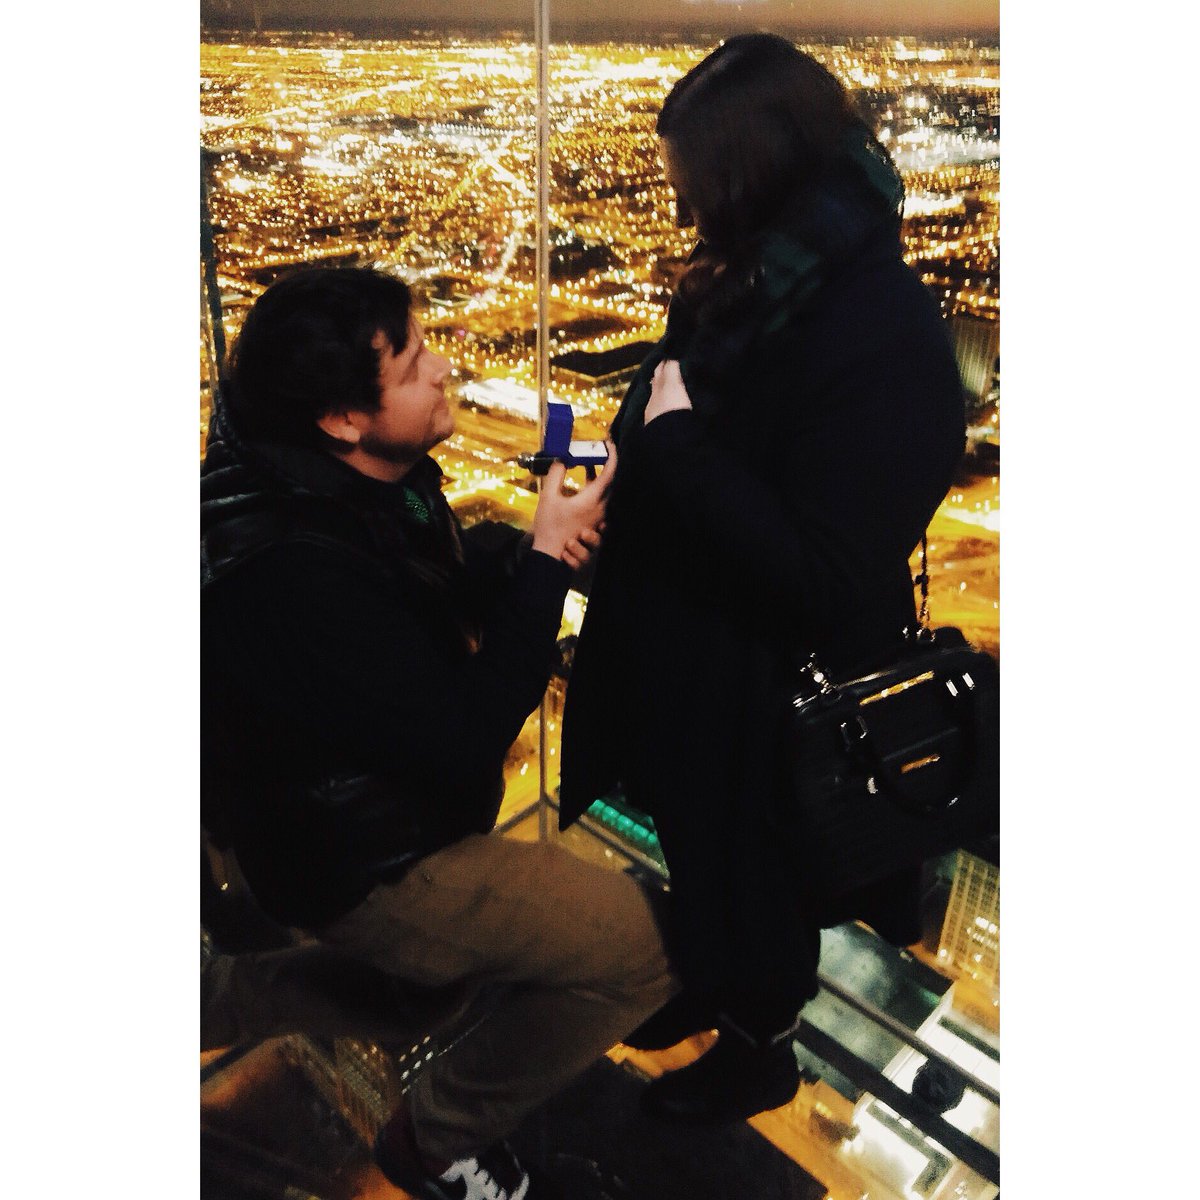 At 103 stories up in the air on a day that I didn’t think could be any more spectacular, Alex proposed and I said yes. 🤗 I cannot wait to go on so many more adventures together for the rest of forever 💚🇮🇪☘️😍💍 #chicagoengagement #skydeckchicago #StPaddysDay #willistower